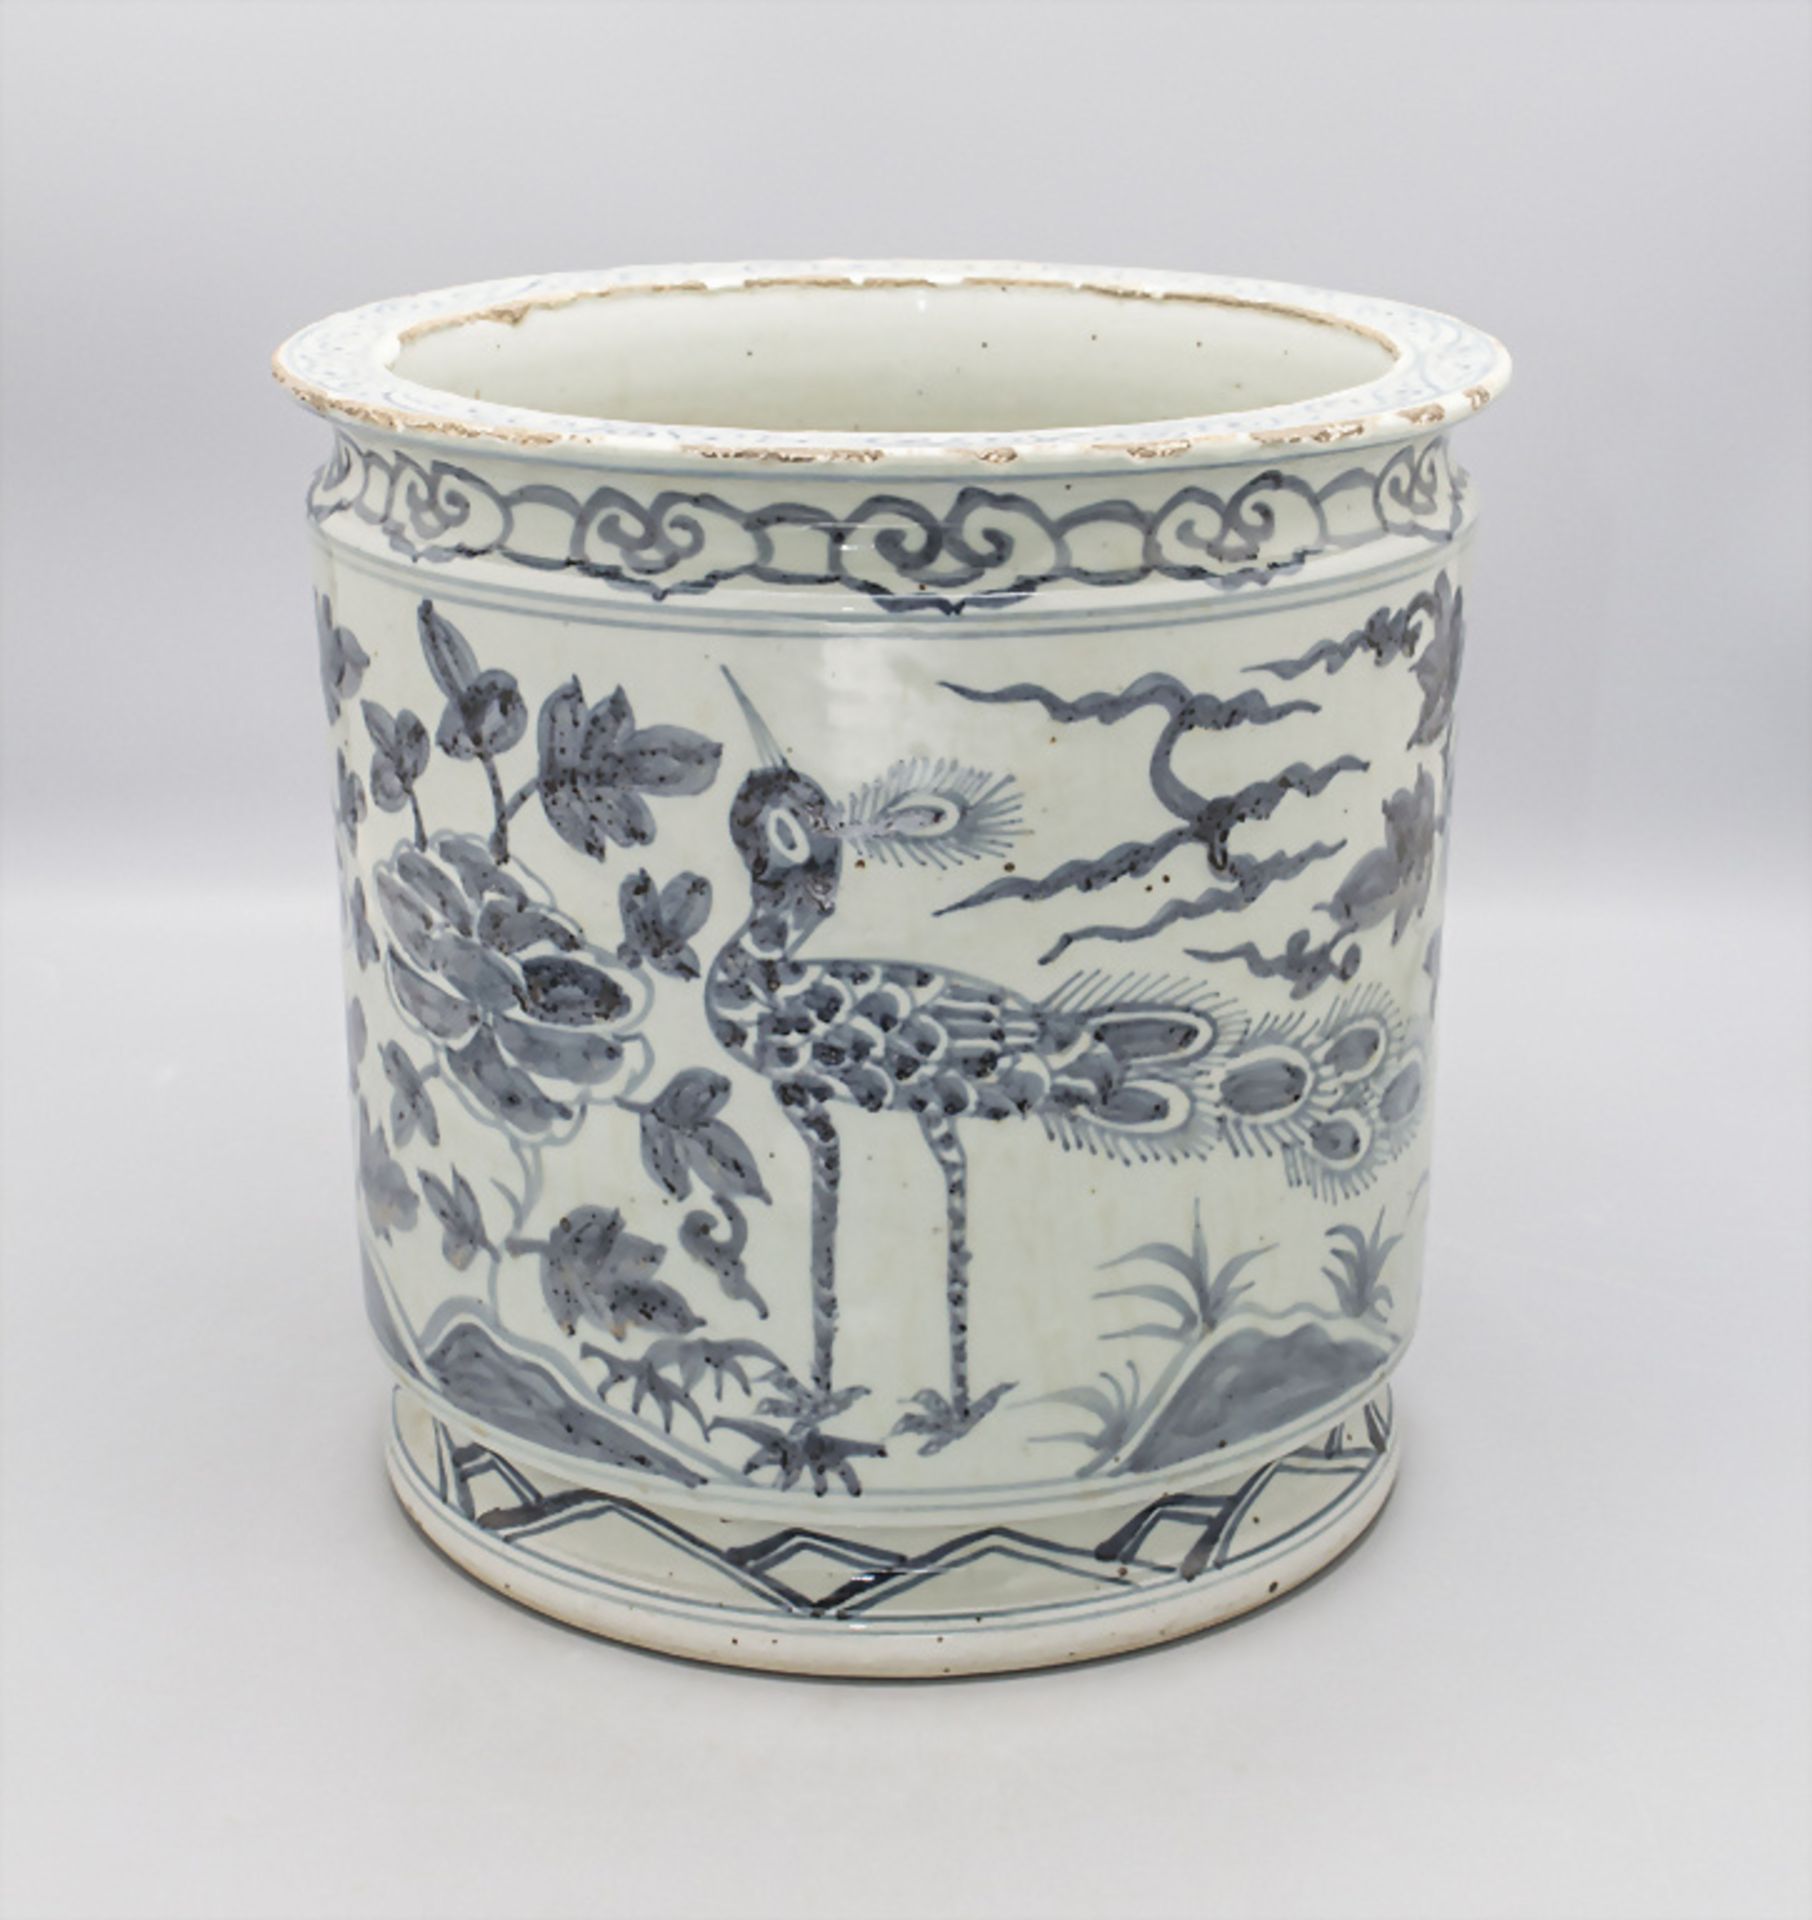 Vase, China, Ming-Dynastie (1368-1644), wohl Yongle Periode 1403-1424